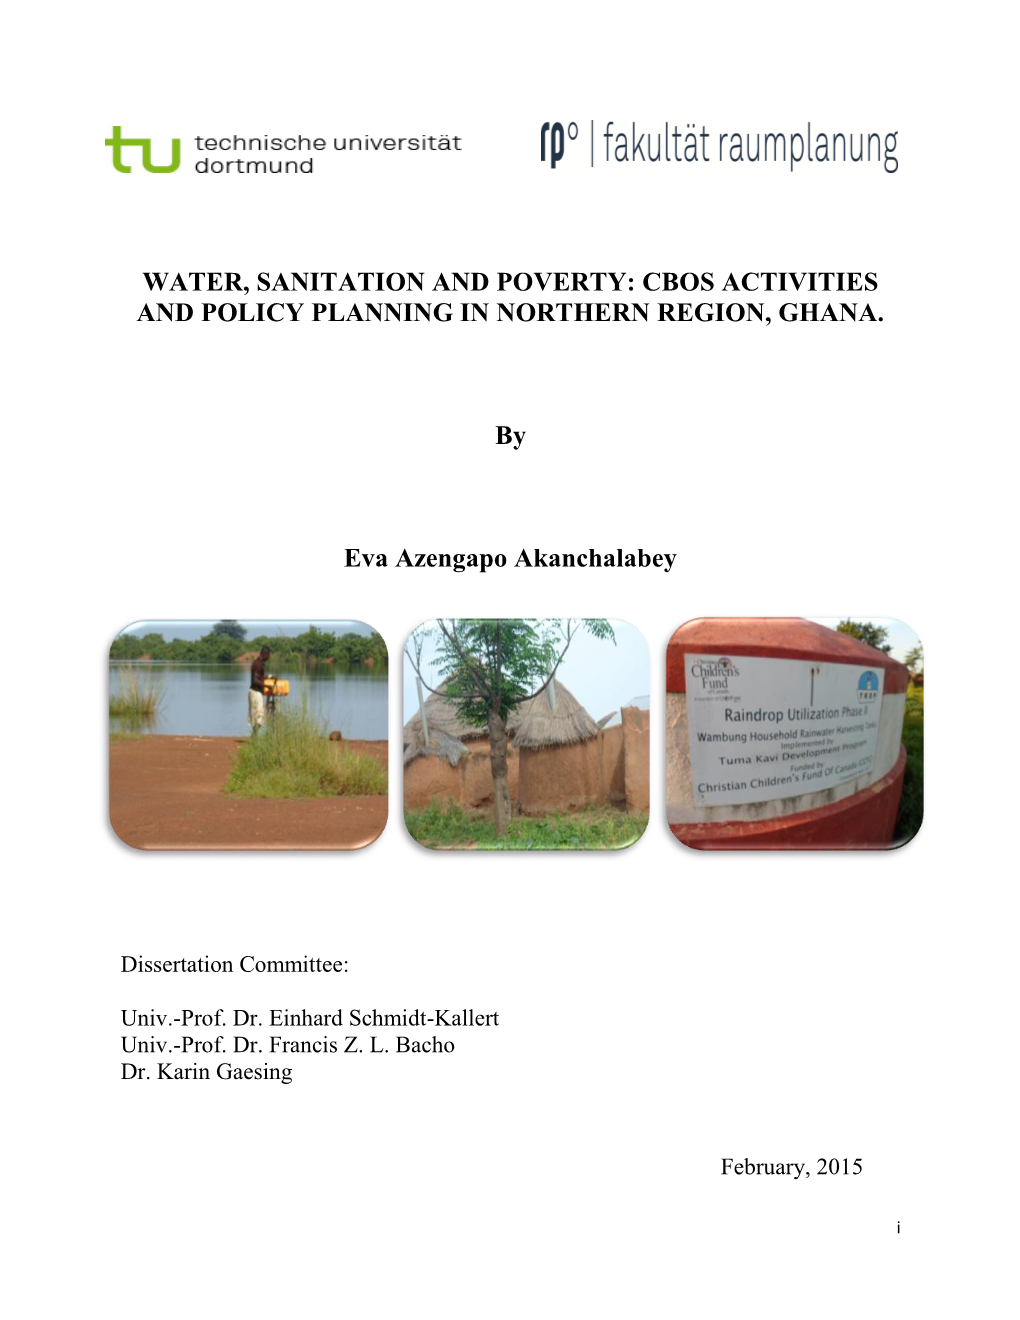 Access to Water and Sanitation Facilities and Services, and Poverty Rreduction in Northern Region, Ghana